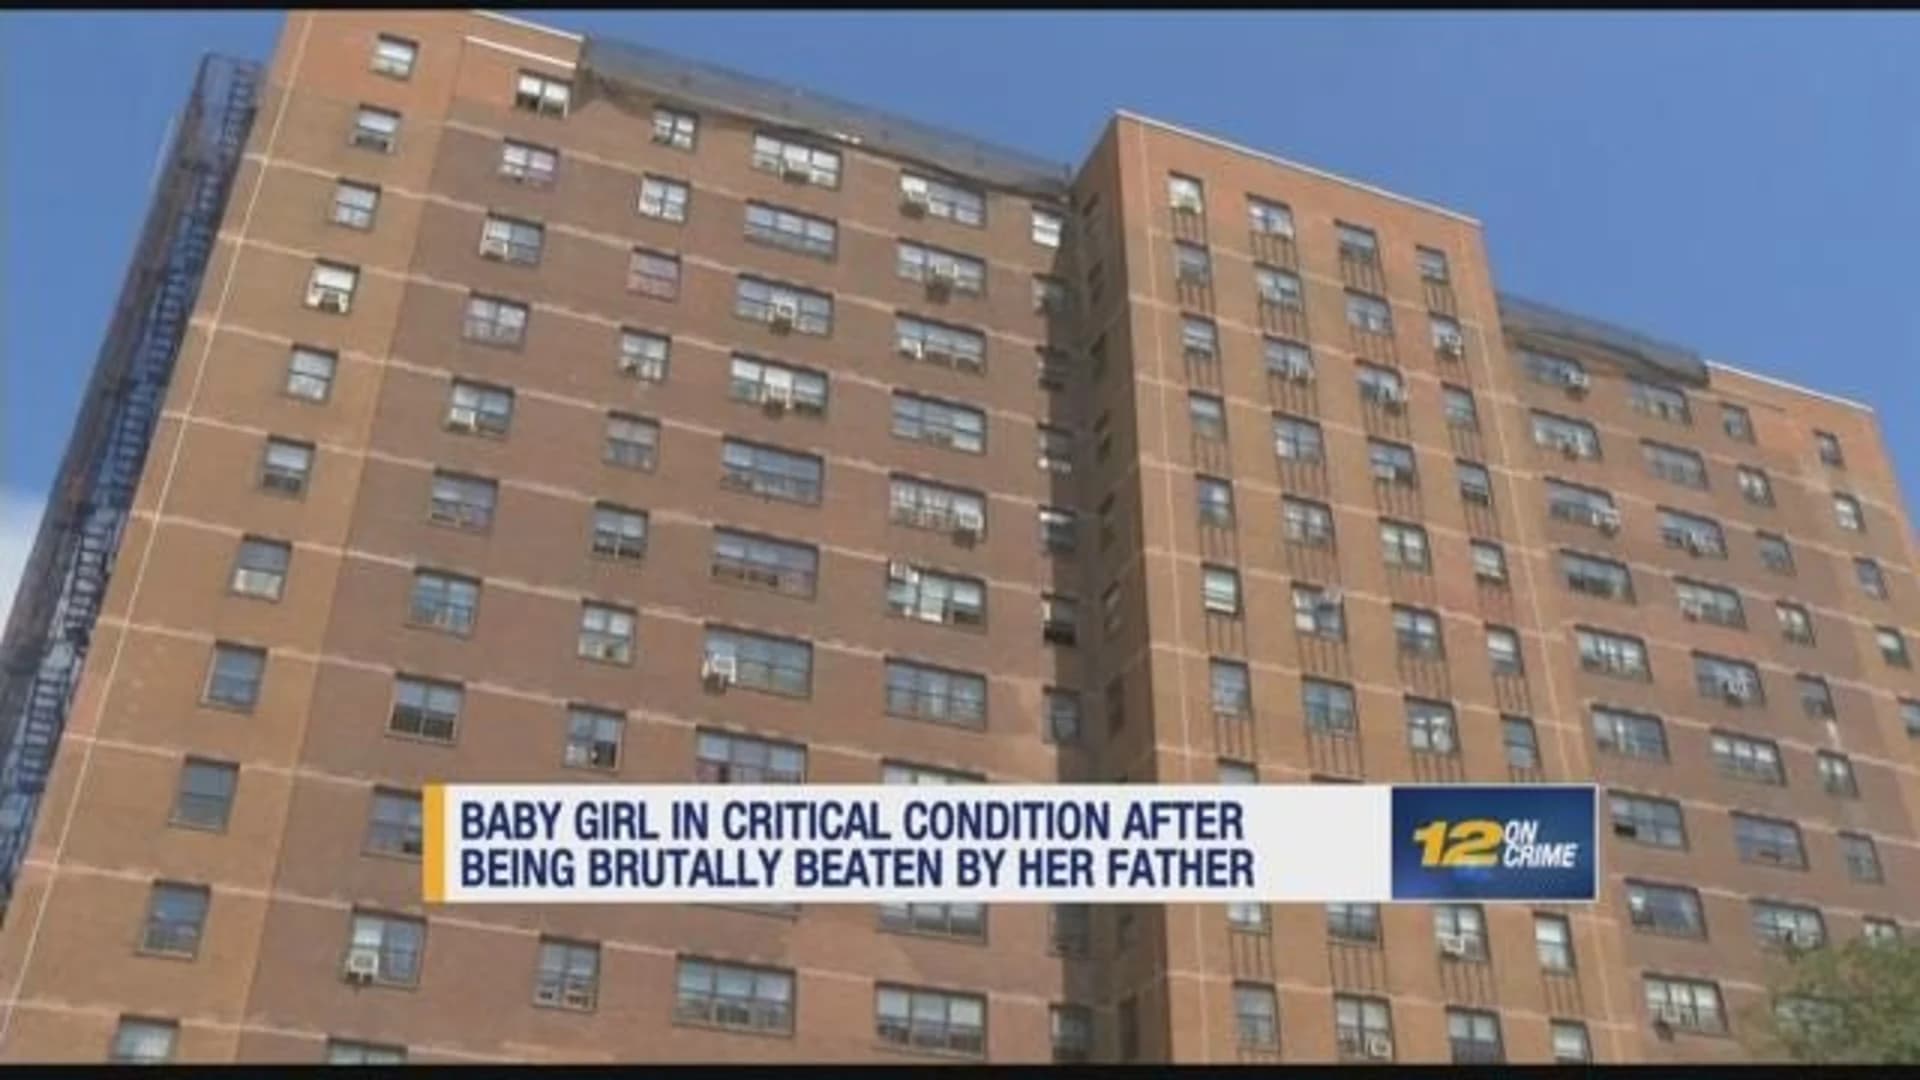 Dad accused of beating baby daughter in Coney Island